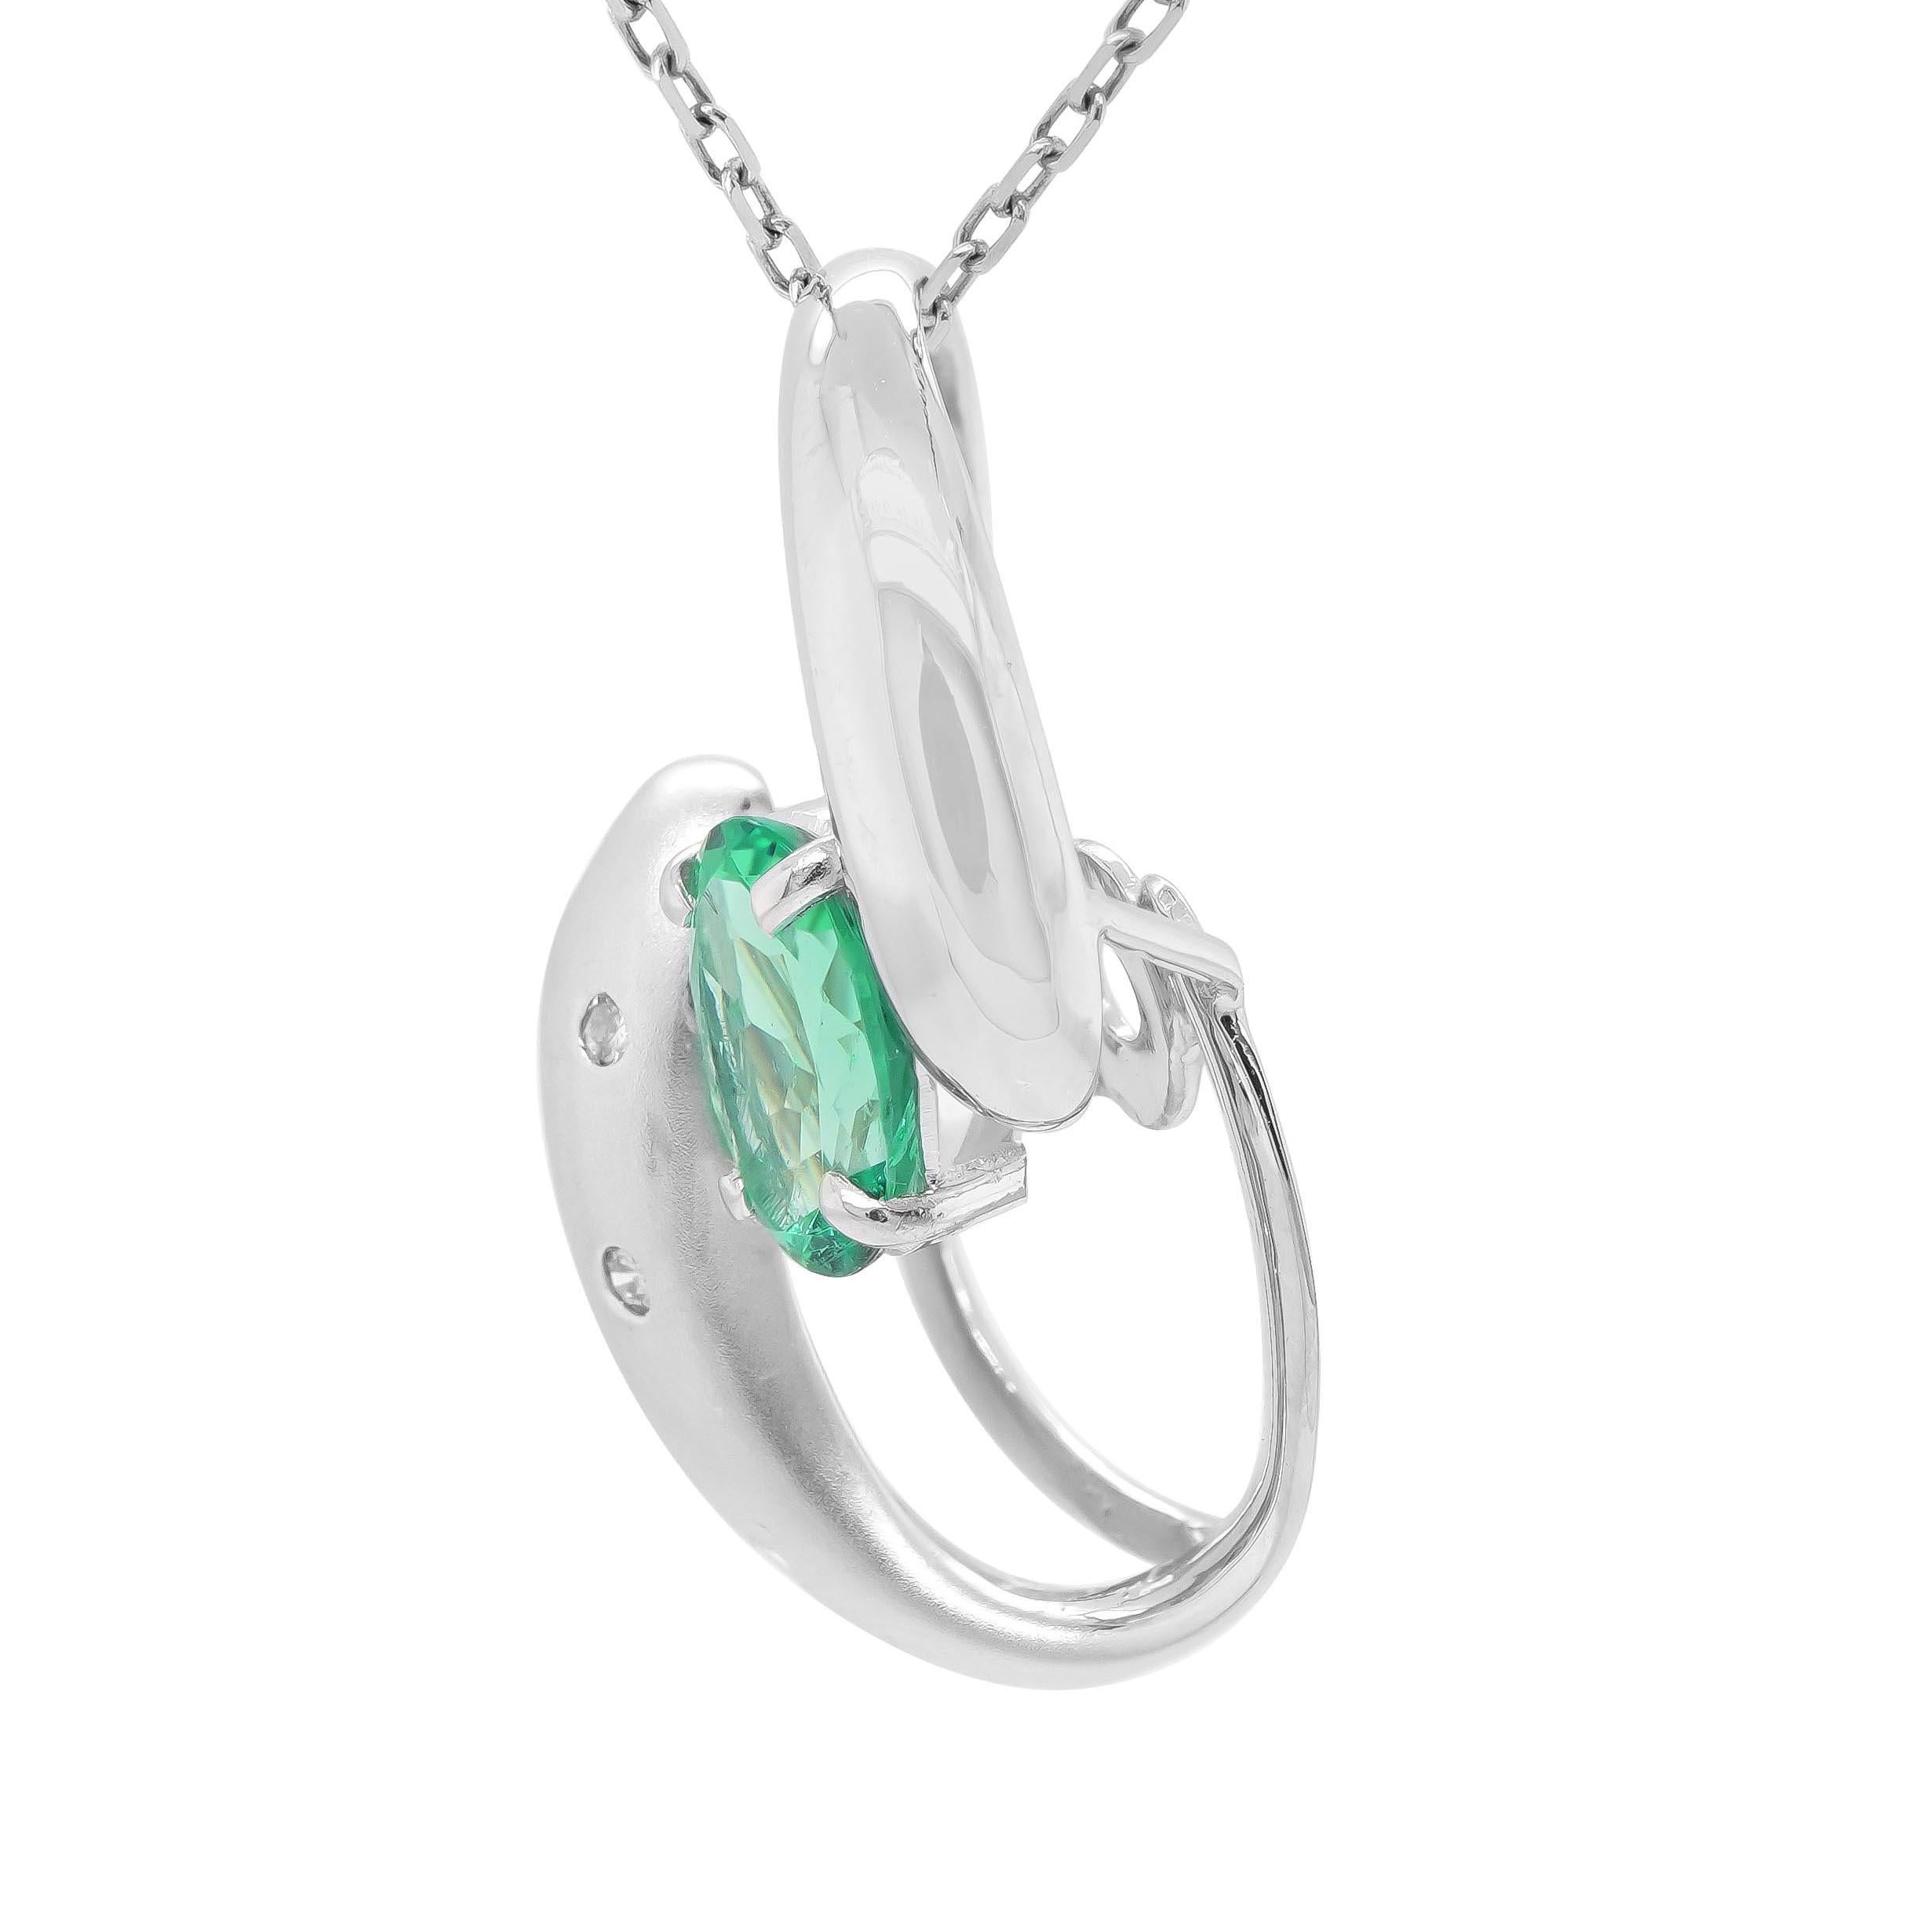 White platinum pendant with a CGL lab-certified, octagonal emerald stone clasped in the center.

Emerald is a highly coveted stone, belonging to the beryl group. These green-hued gemstones are formed due to the chemical combination of beryl and